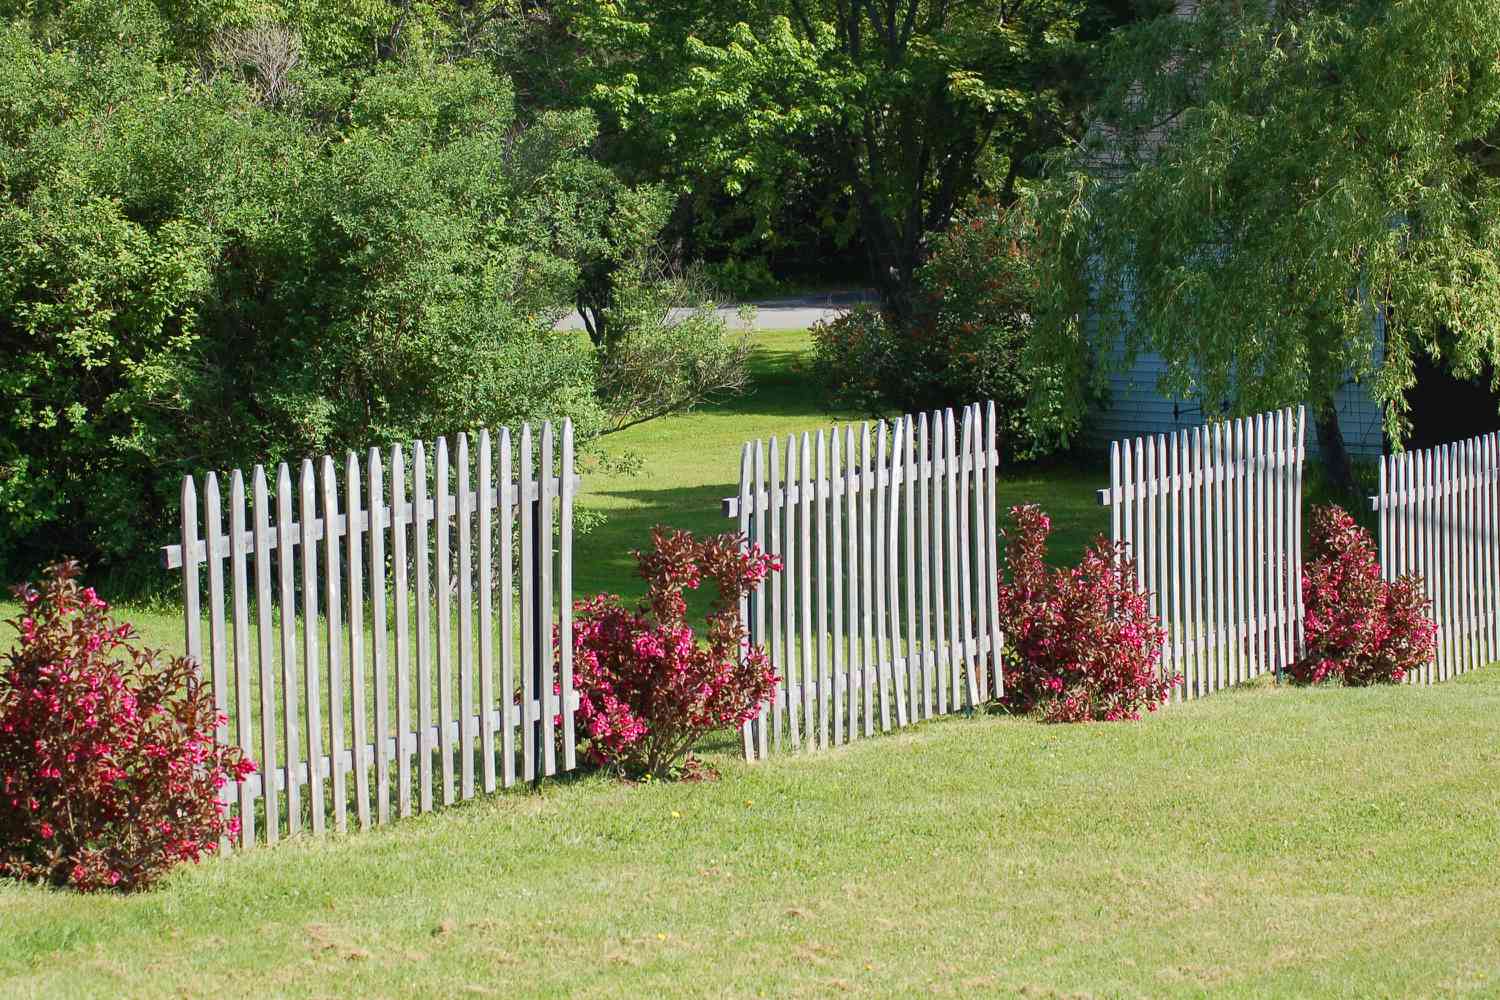 Breaking up a fence with landscaping